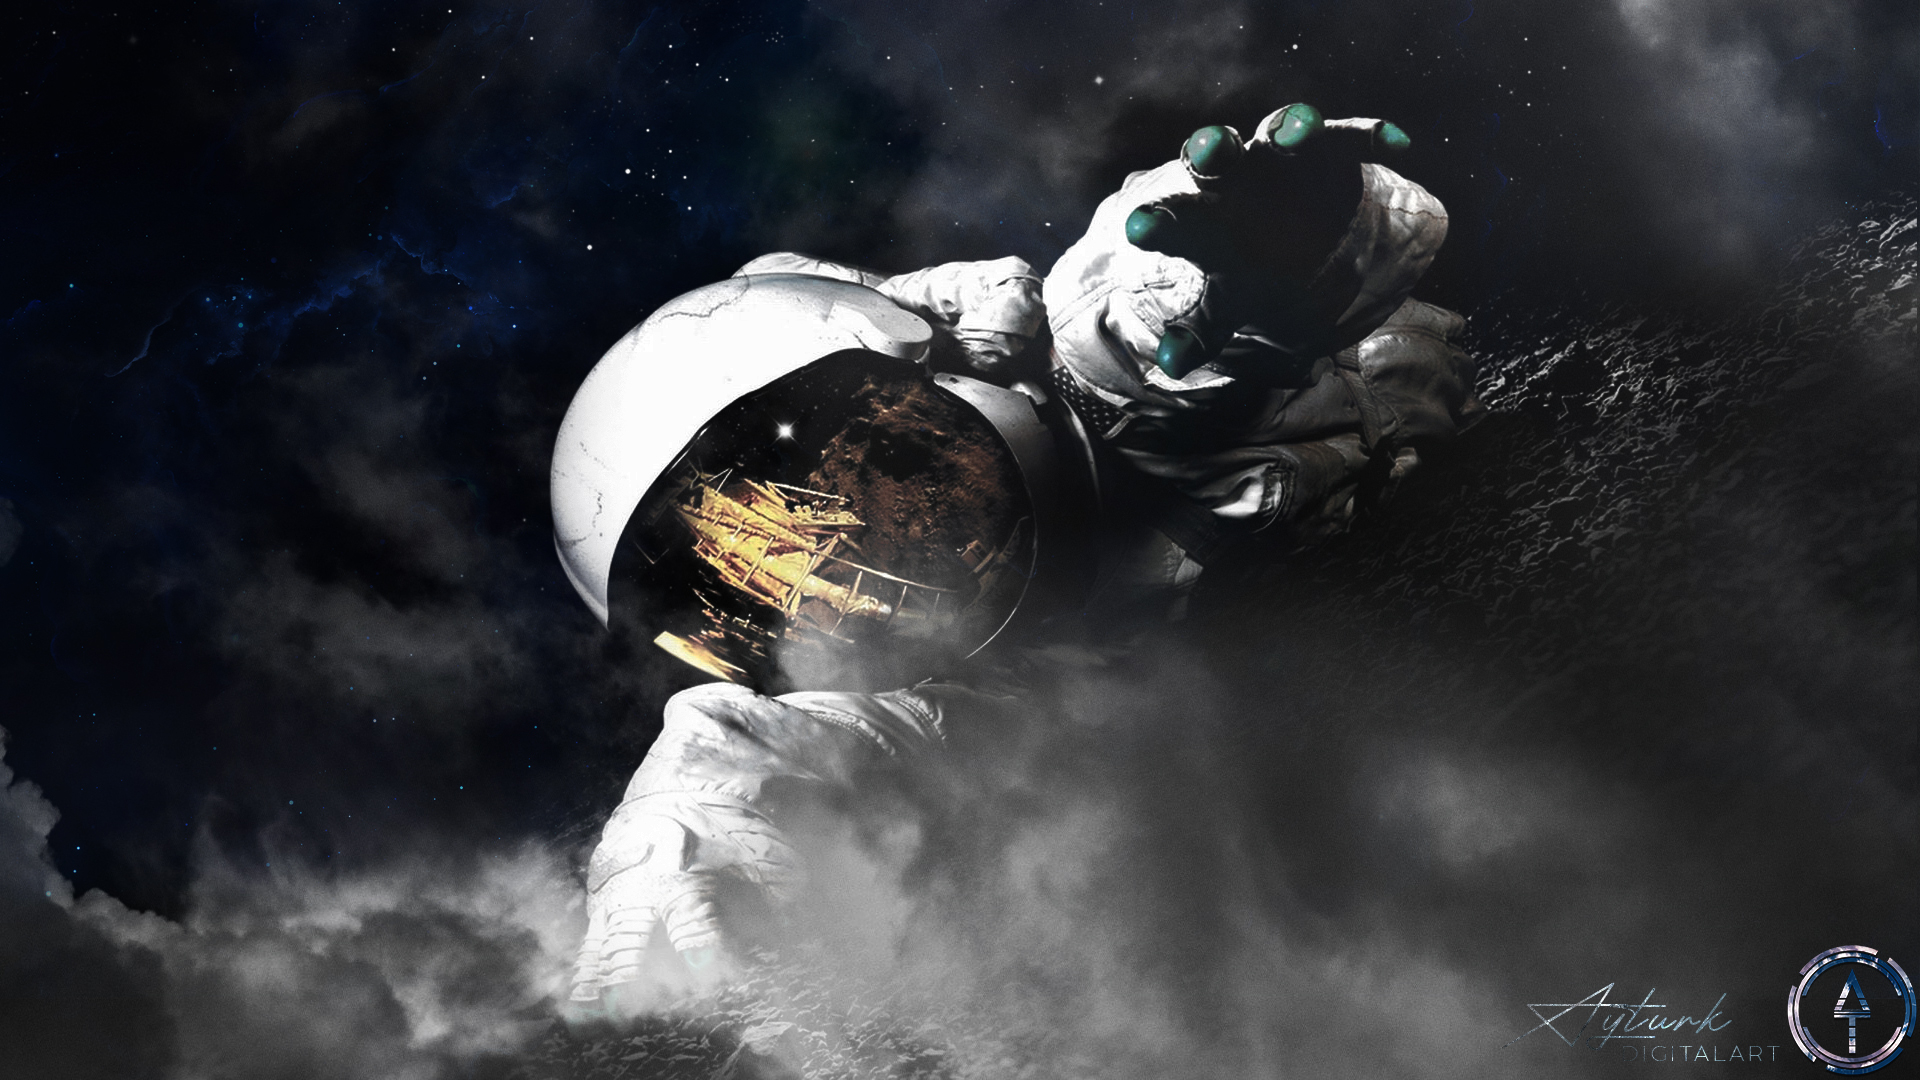 General 1920x1080 astronaut planet spacescapes galaxy stars NASA digital art photo manipulation space space art